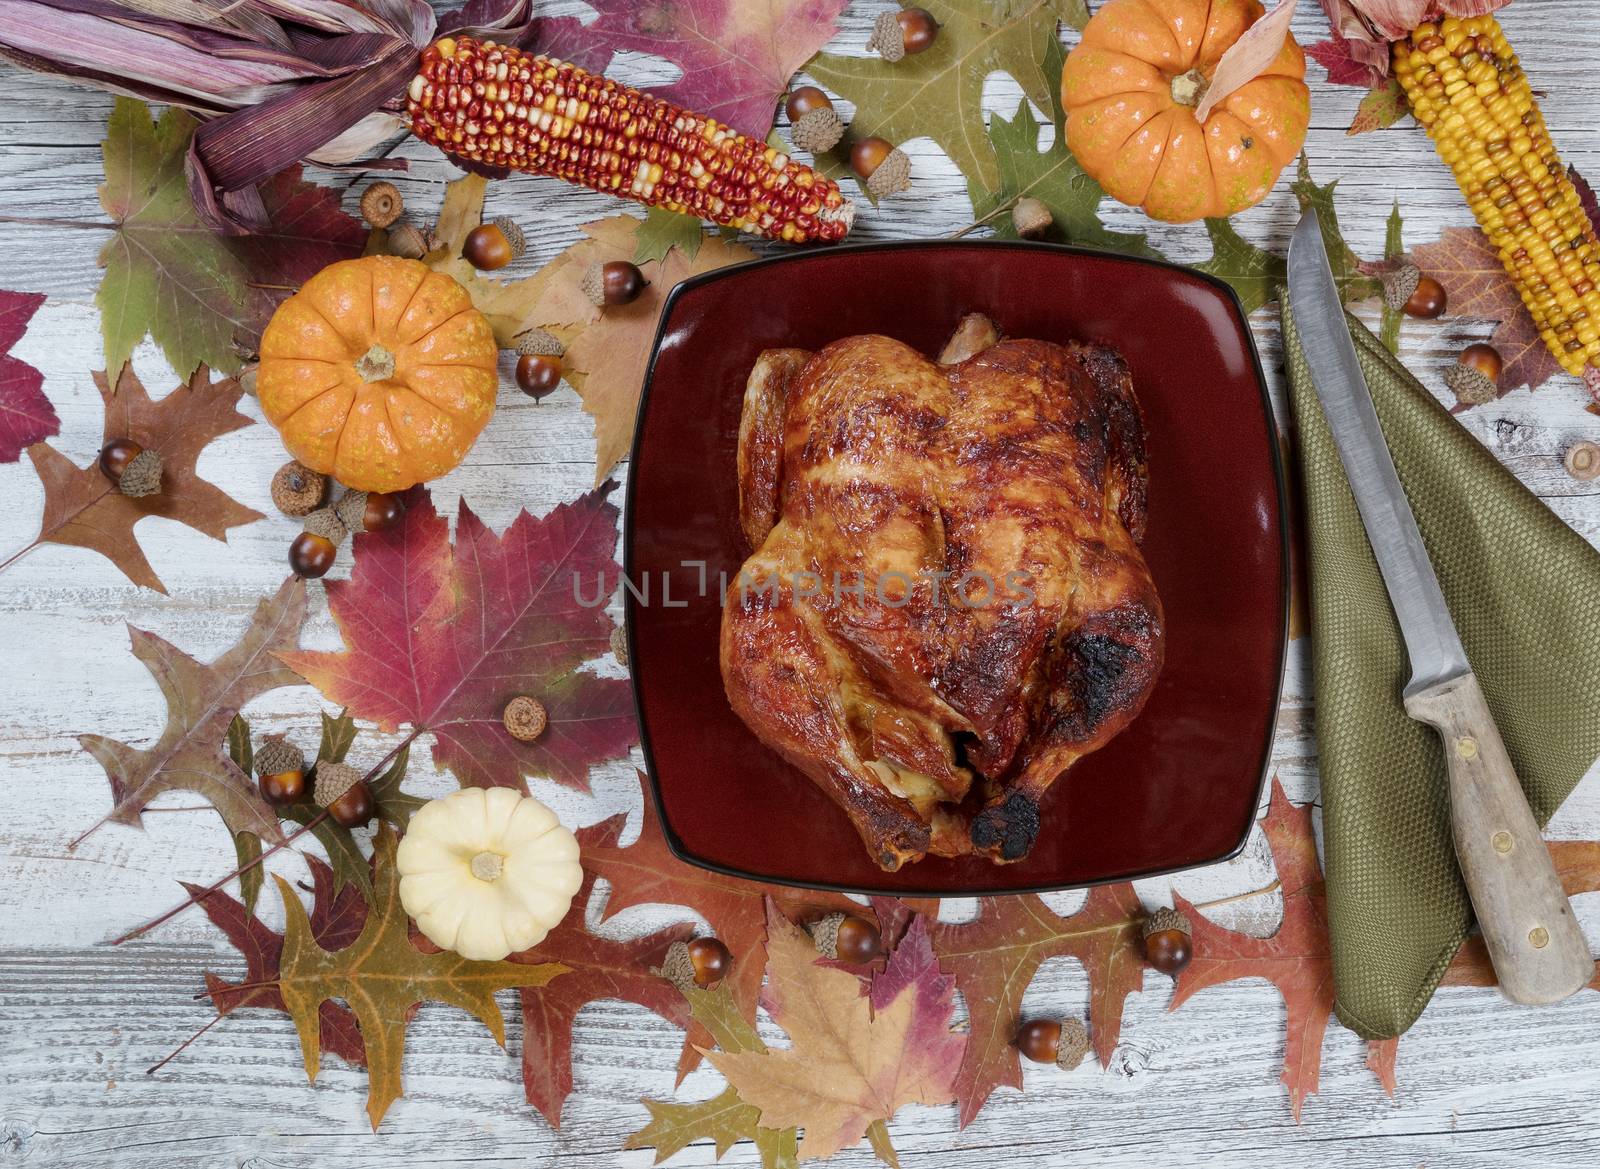 Thanksgiving turkey with autumn decorations on rustic table sett by tab1962